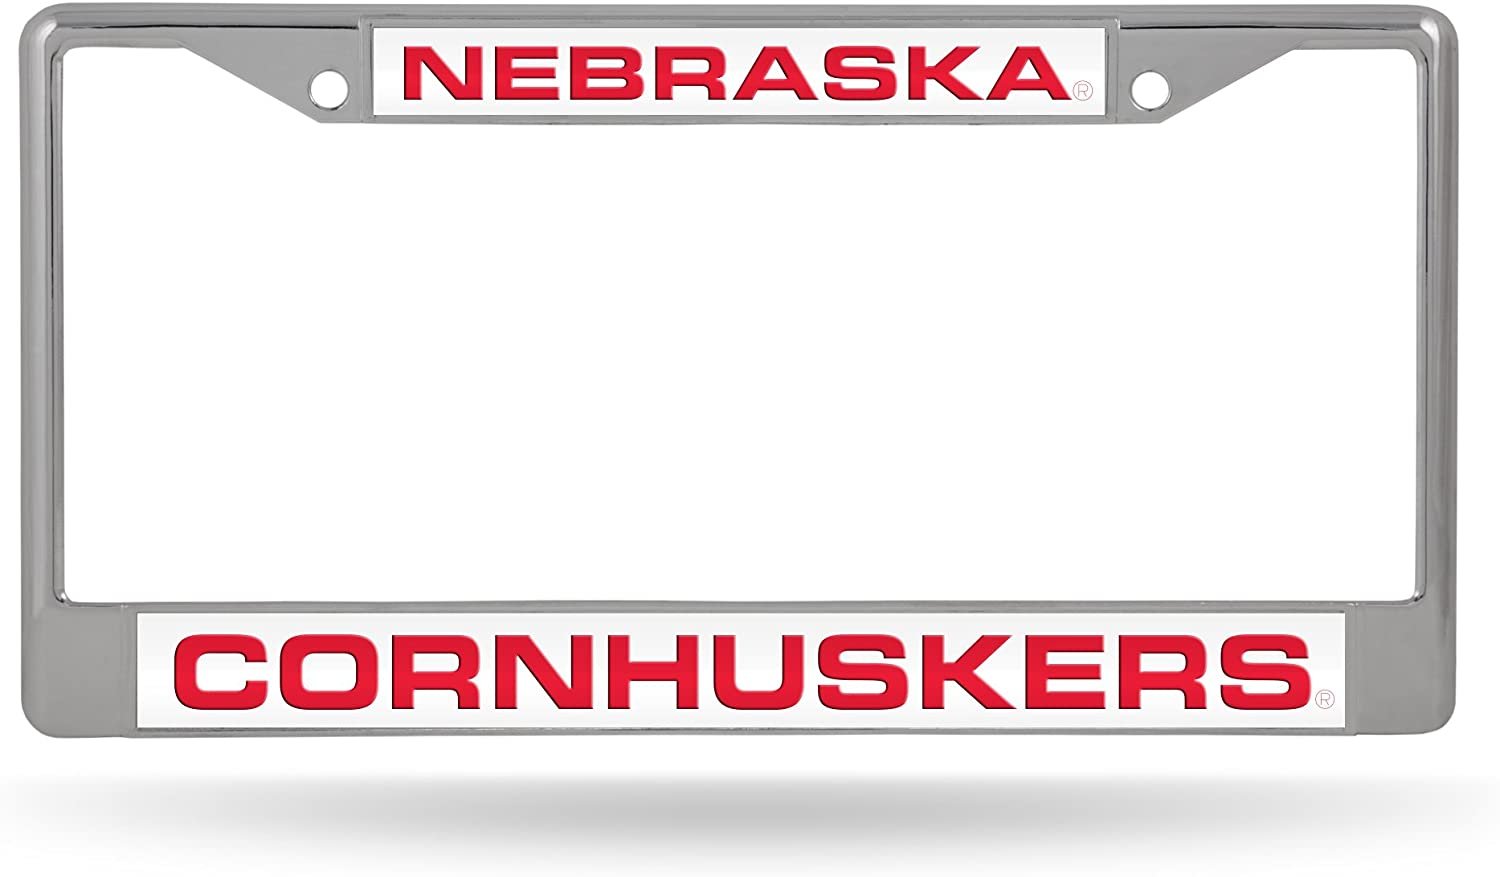 University of Nebraska Cornhuskers Chrome Metal License Plate Frame Tag Cover, Laser Acrylic Mirrored Inserts, 12x6 Inch